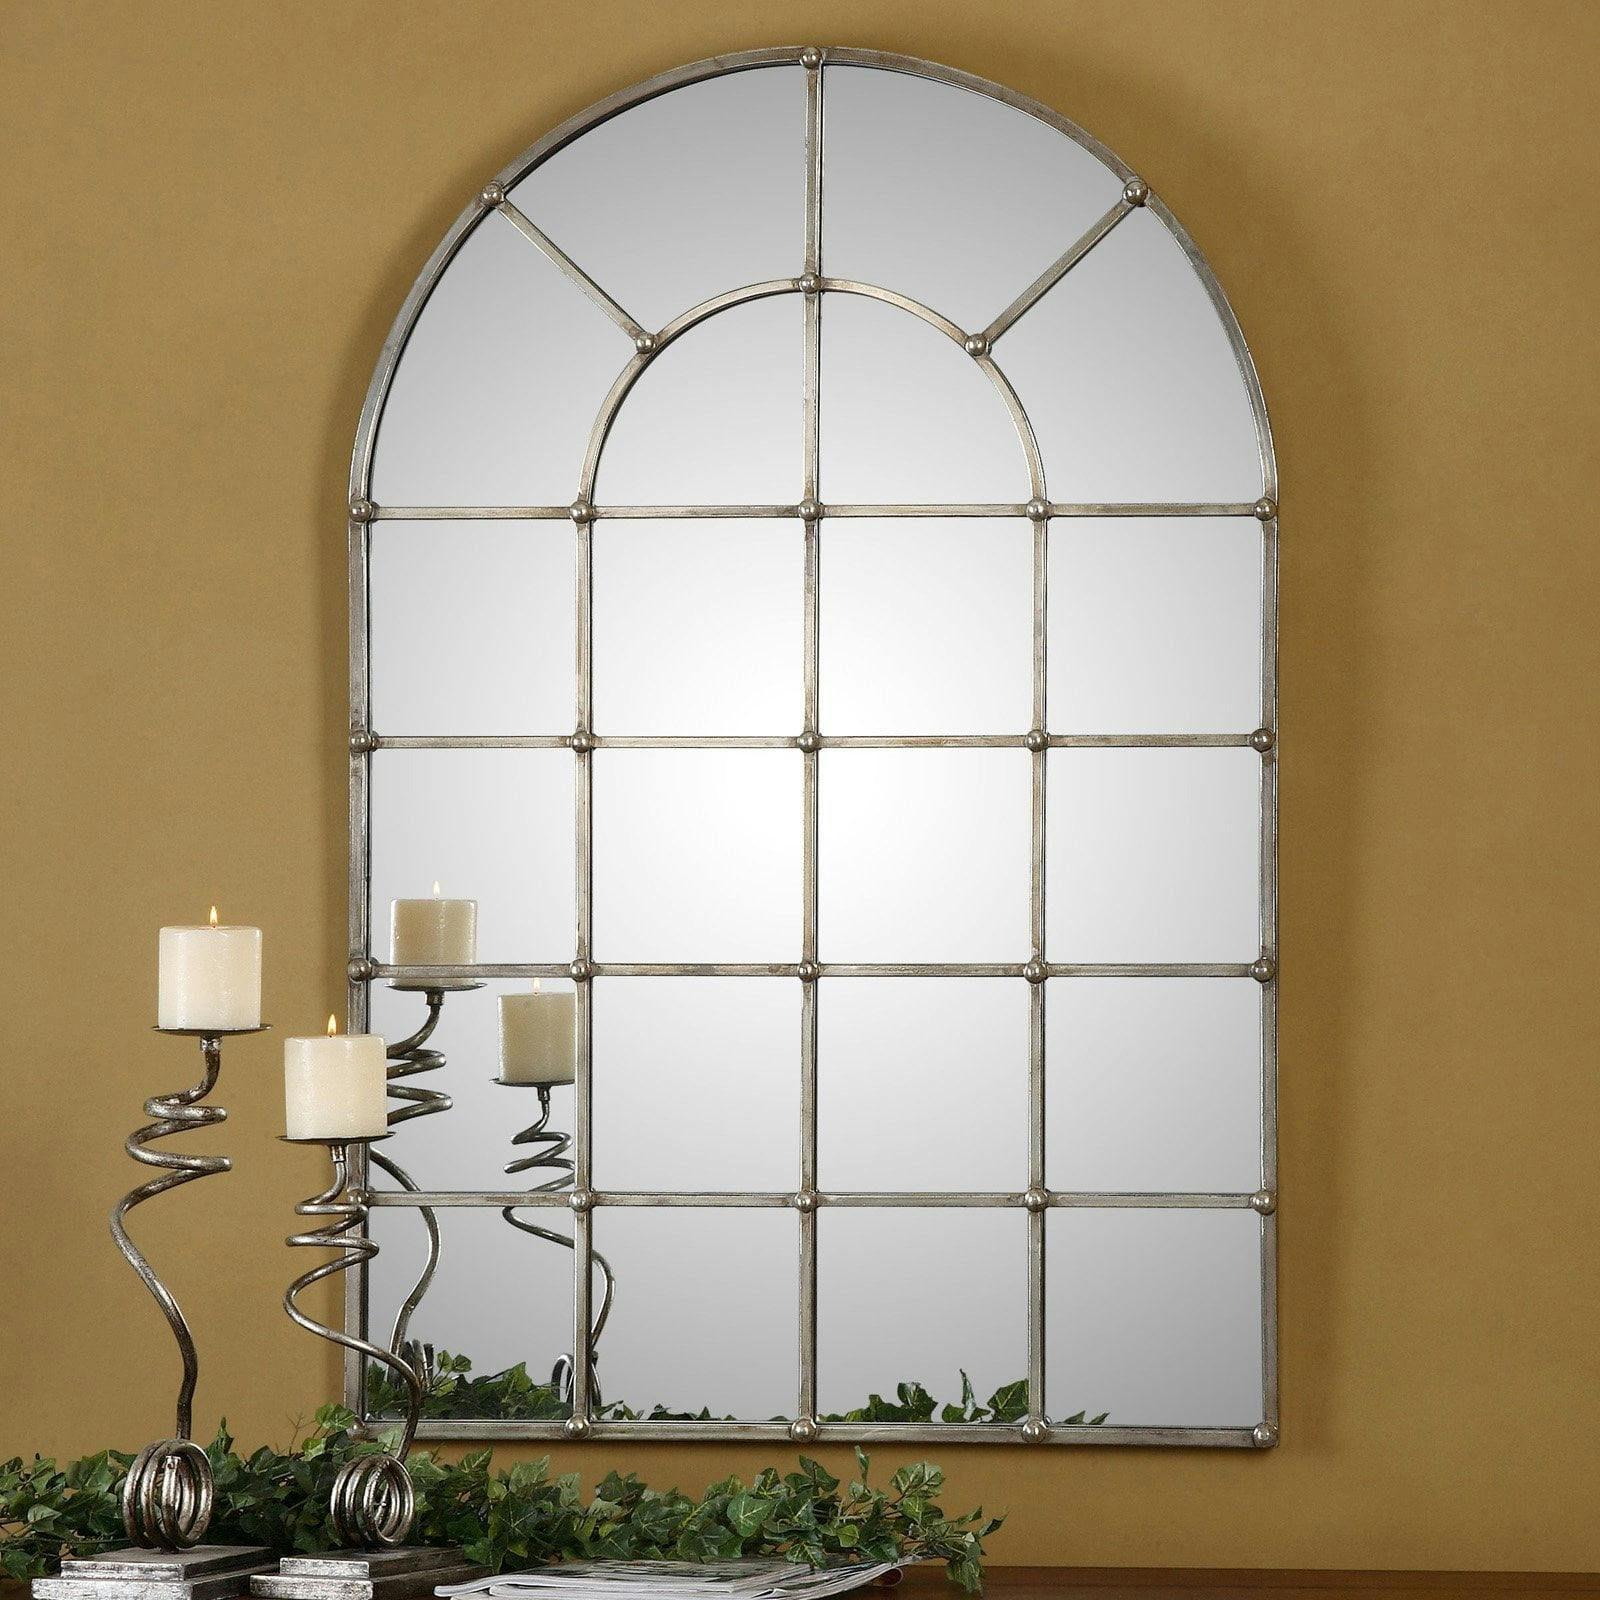 Transitional Silver Oxidized Metal Arched Window Mirror 30"x44"